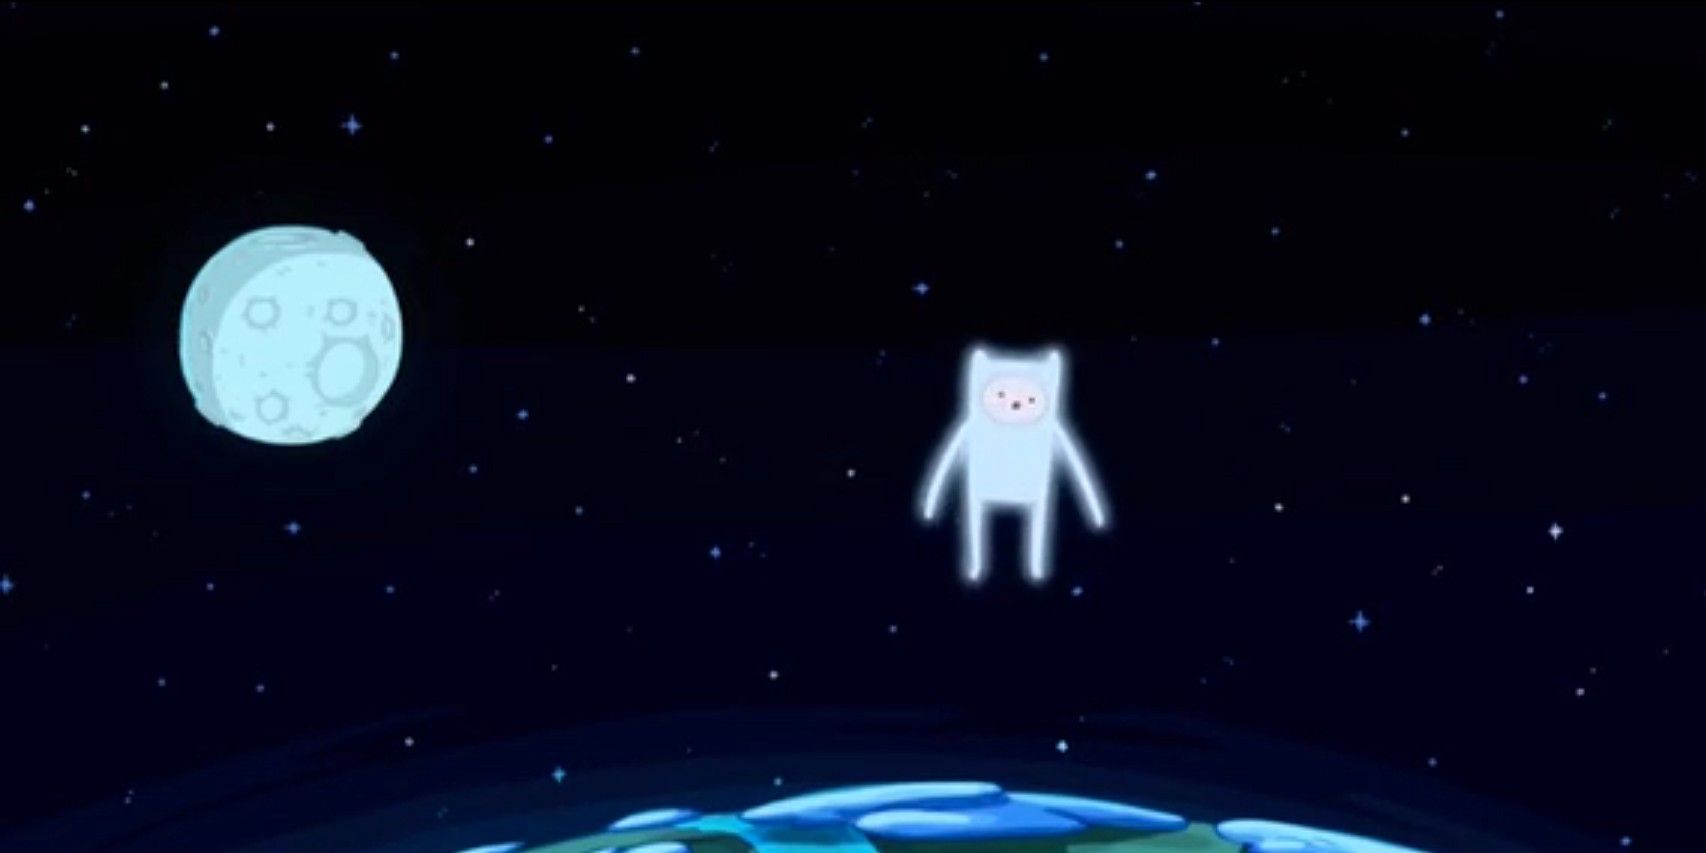 Finn floats above the planet as he astrally projects in Adventure time